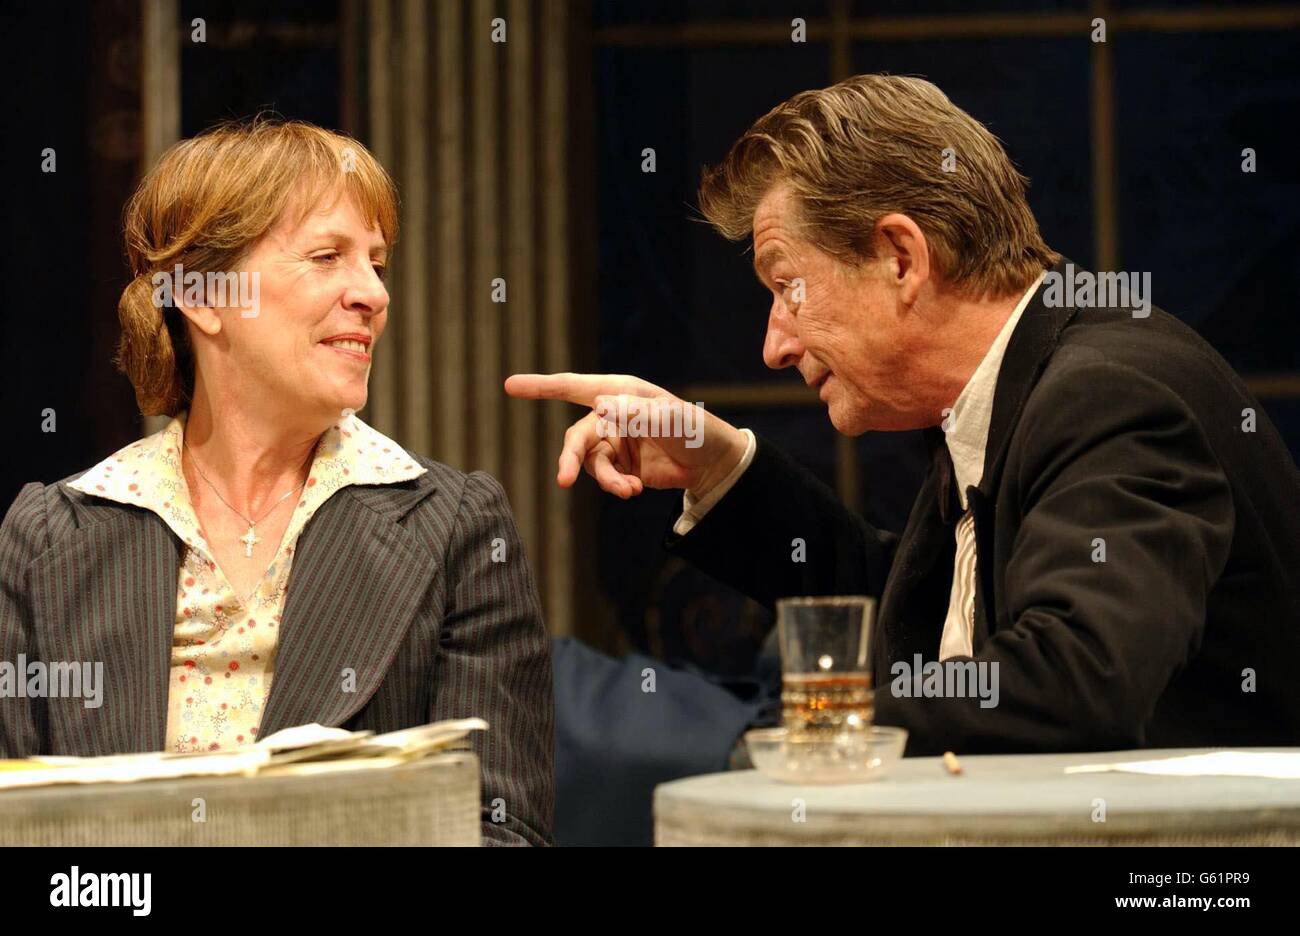 Actors John Hurt and Penelope Wilton during a photocall for their play 'Afterplay' at the Gielgud Theatre on Shaftbury Avenue in London. The play written by Brian Friel open on Thursday 19 September. Stock Photo